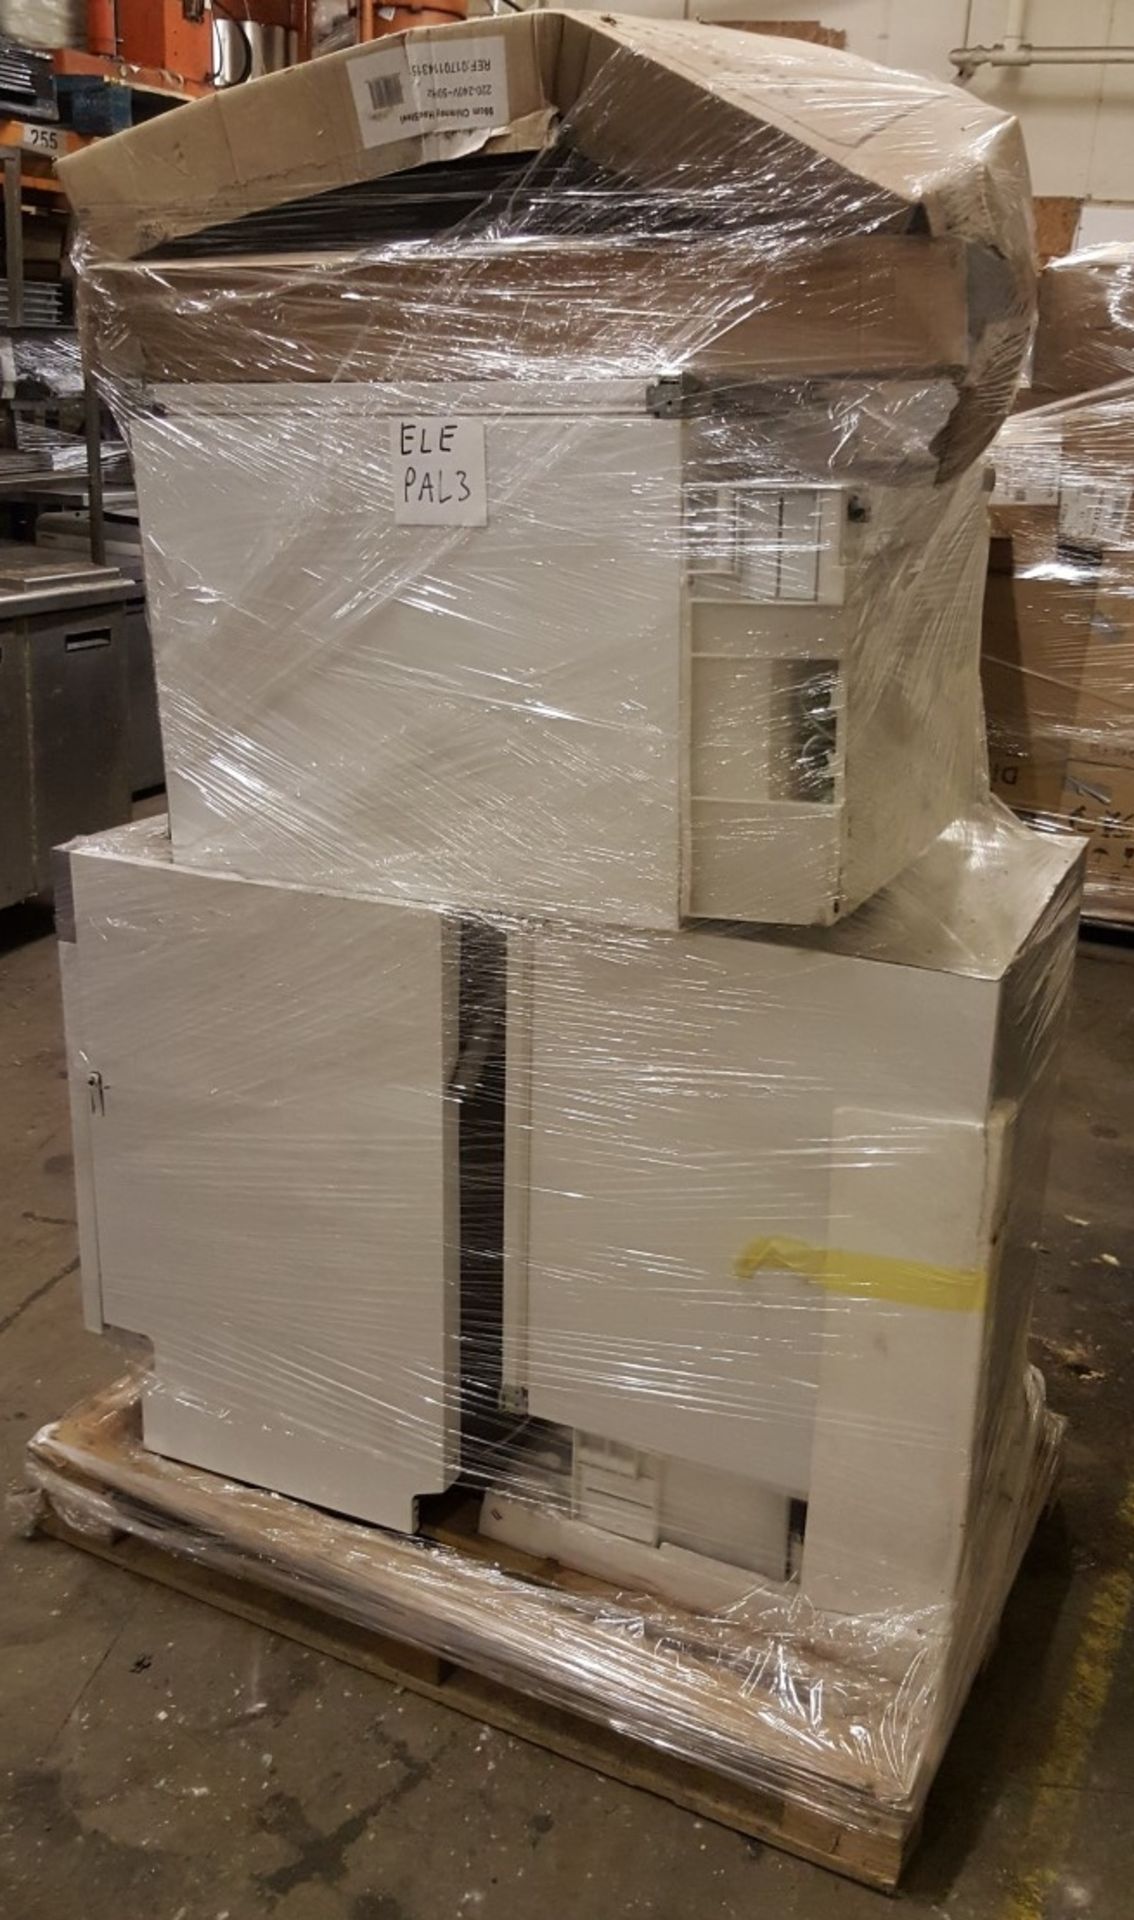 1 x Assorted Pallet of Domestic Appliances - Includes Fridges, Dishwasher & More REF: ELEPAL3 - Image 3 of 9